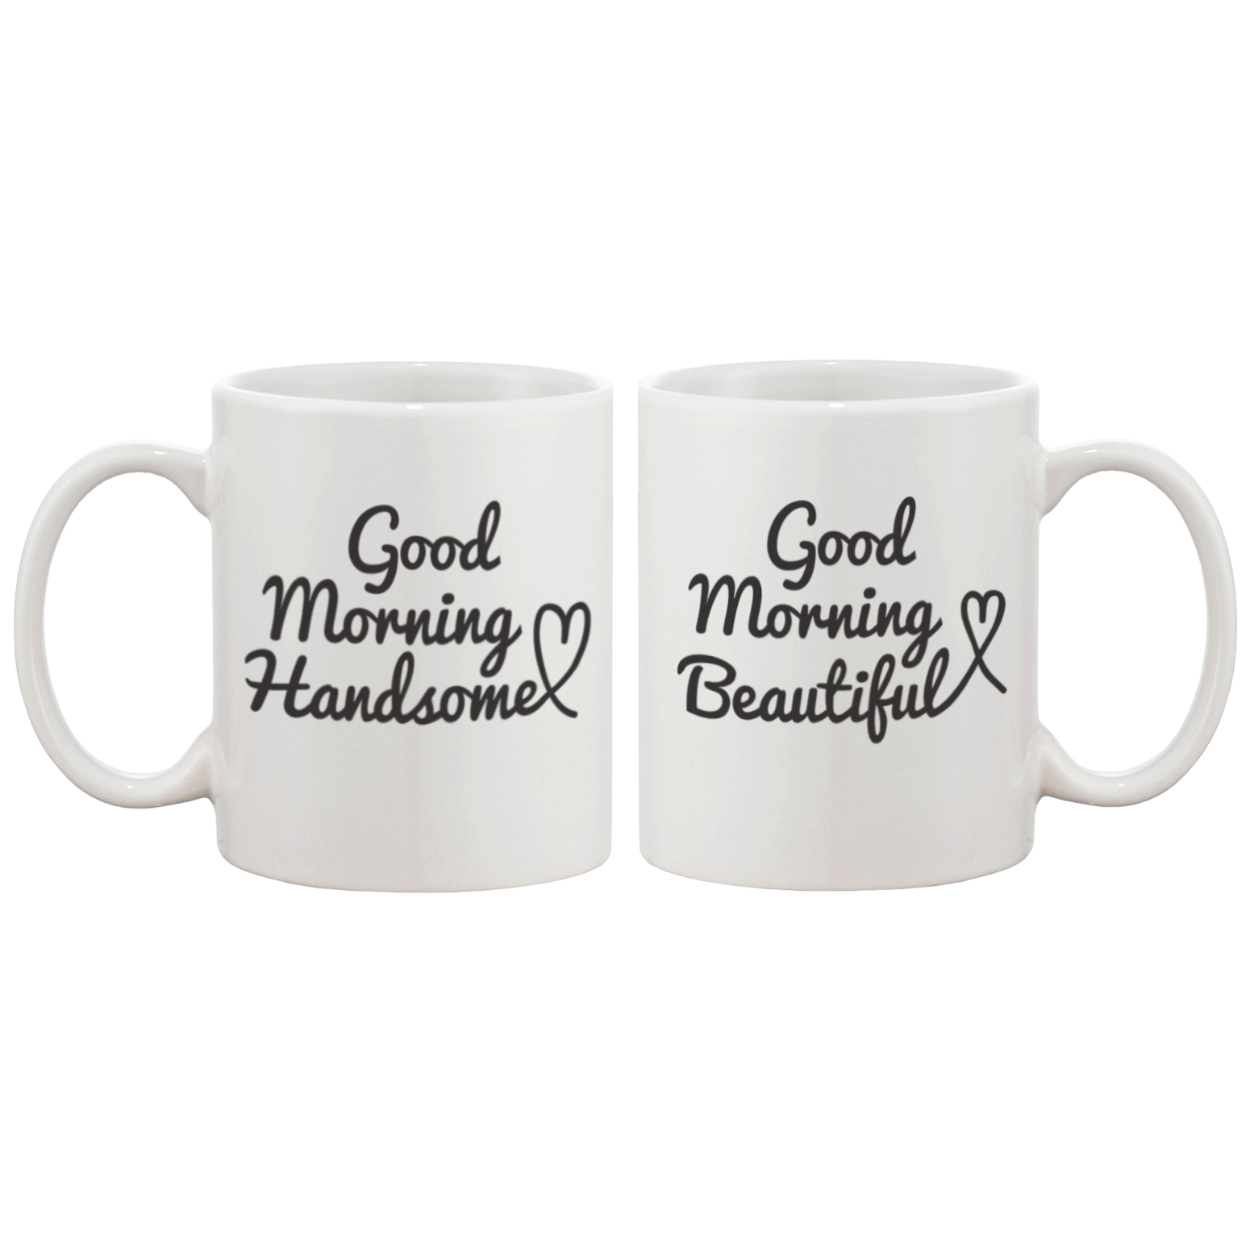 His and Hers Coffee Mug Set - Good Morning Handsome, Good Morning Beautiful White